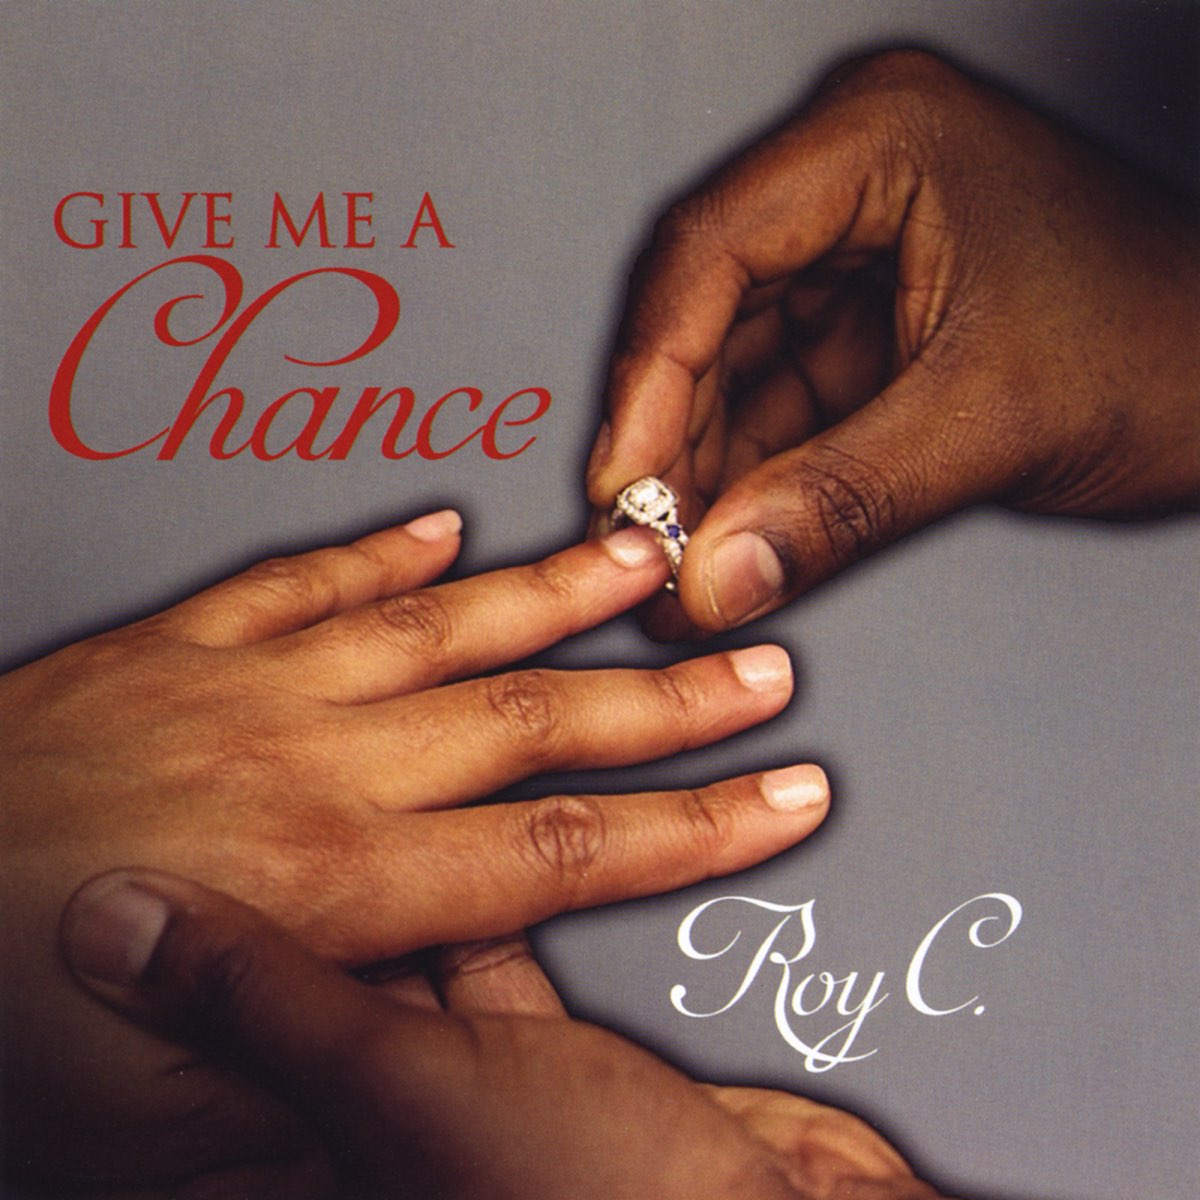 Give to me. Roy c - give me a chance. Give me a chance.